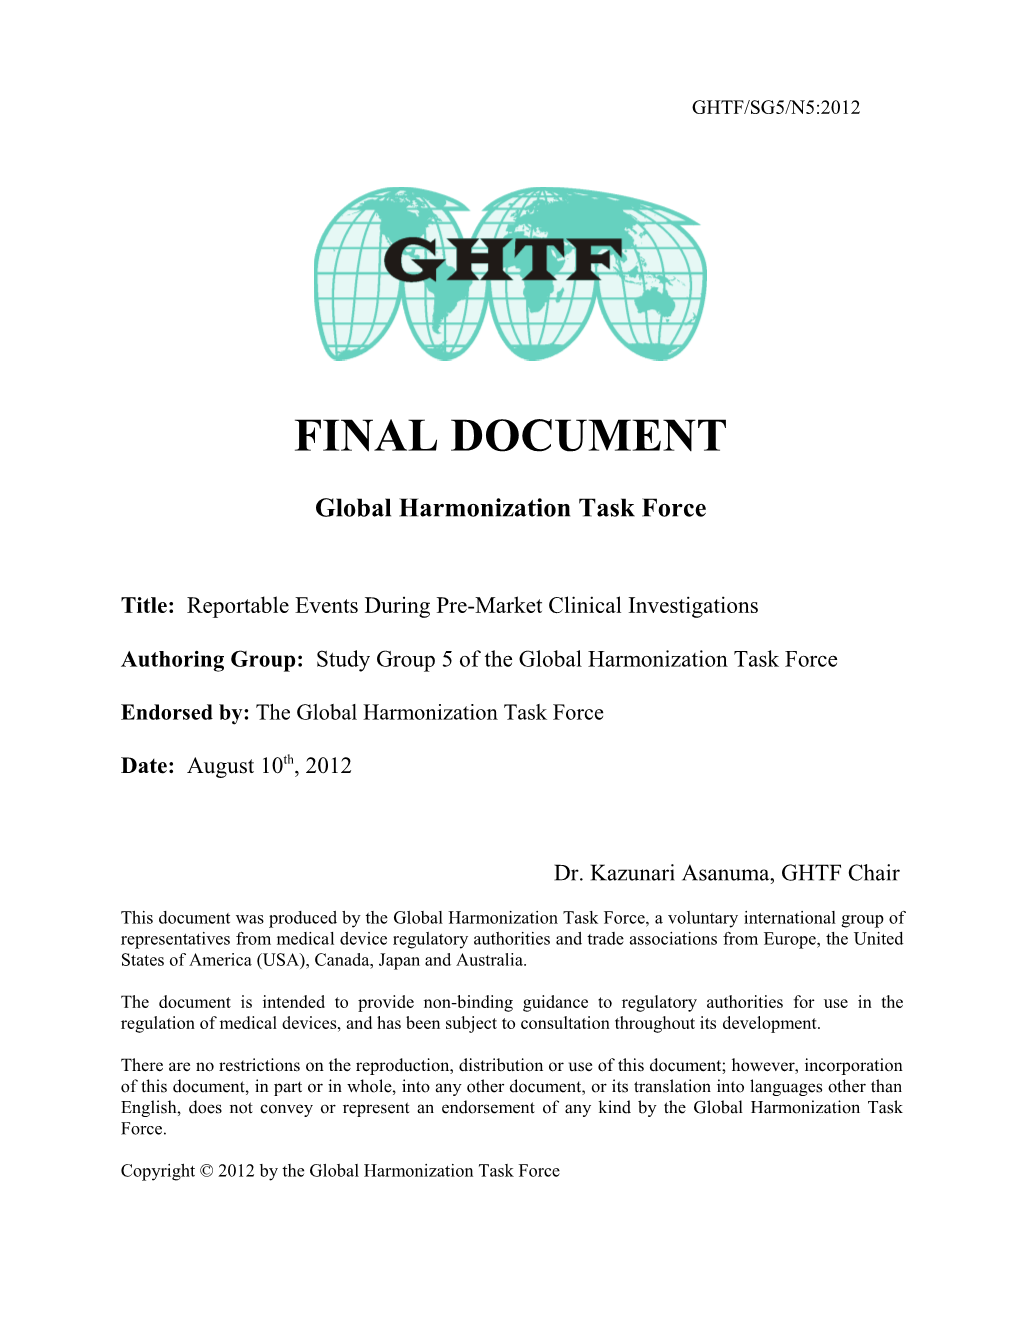 GHTDF SG5 Reportable Events During Pre-Market Clinical Investigations